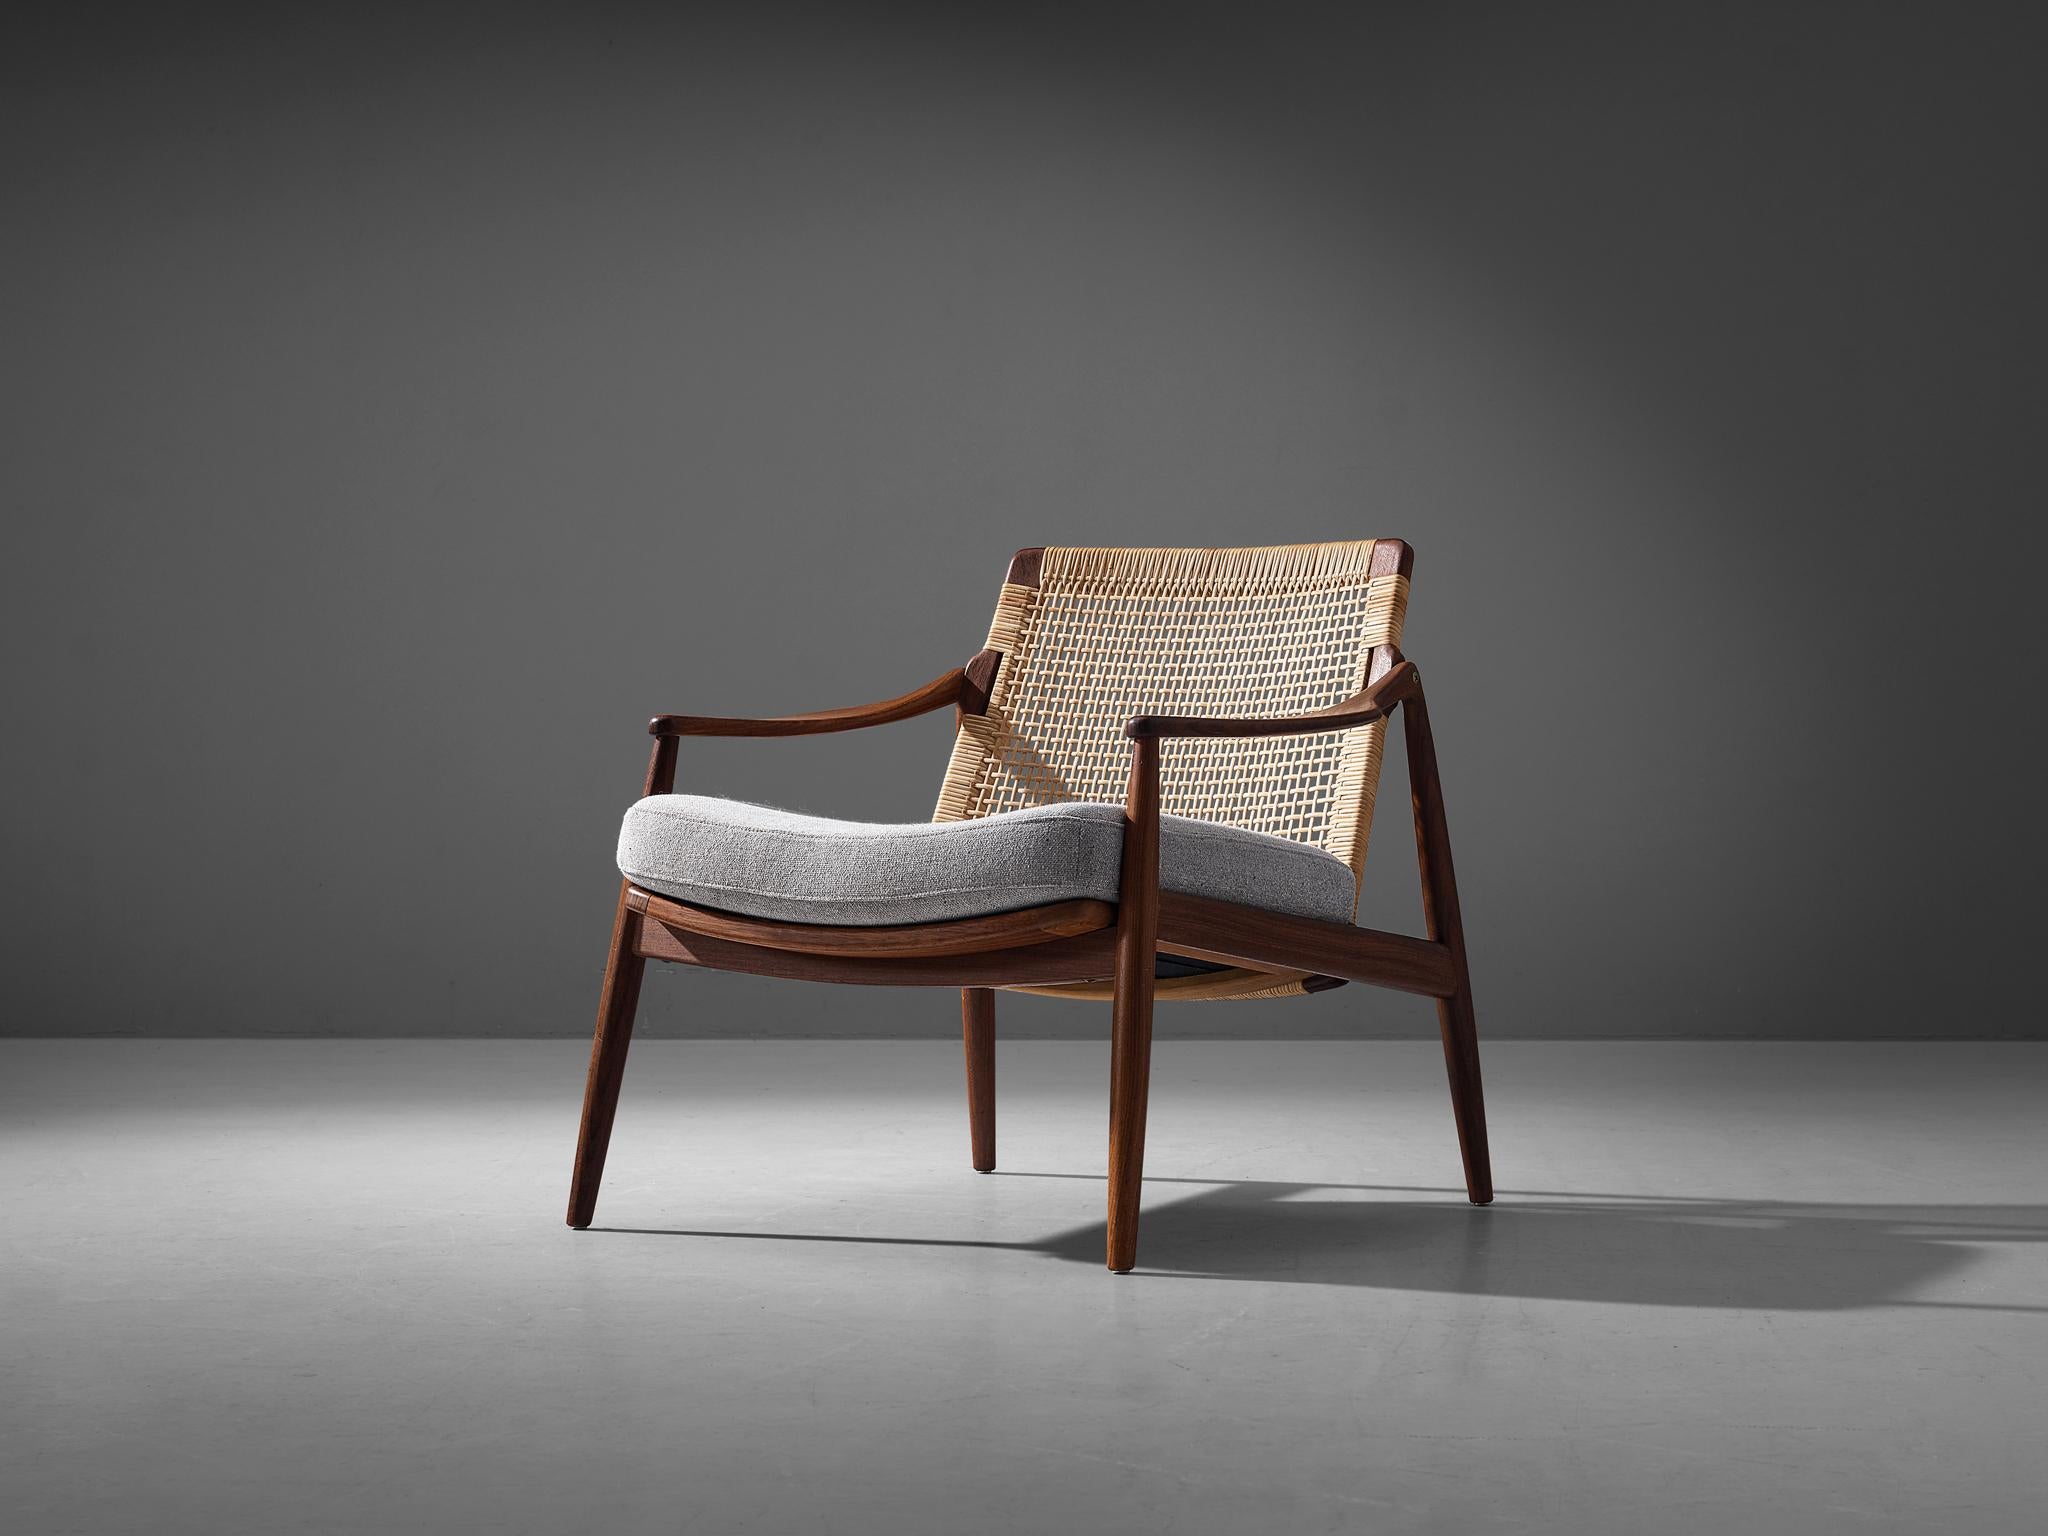 Hartmut Lohmeyer for Wilkhahn, lounge chair, teak, cane, fabric striped upholstery, Germany, 1960.

The lounge chair by Hartmut Lohmeyer is organically shaped. The wide open teak frame features a slightly tilted back made out of cane. The softly